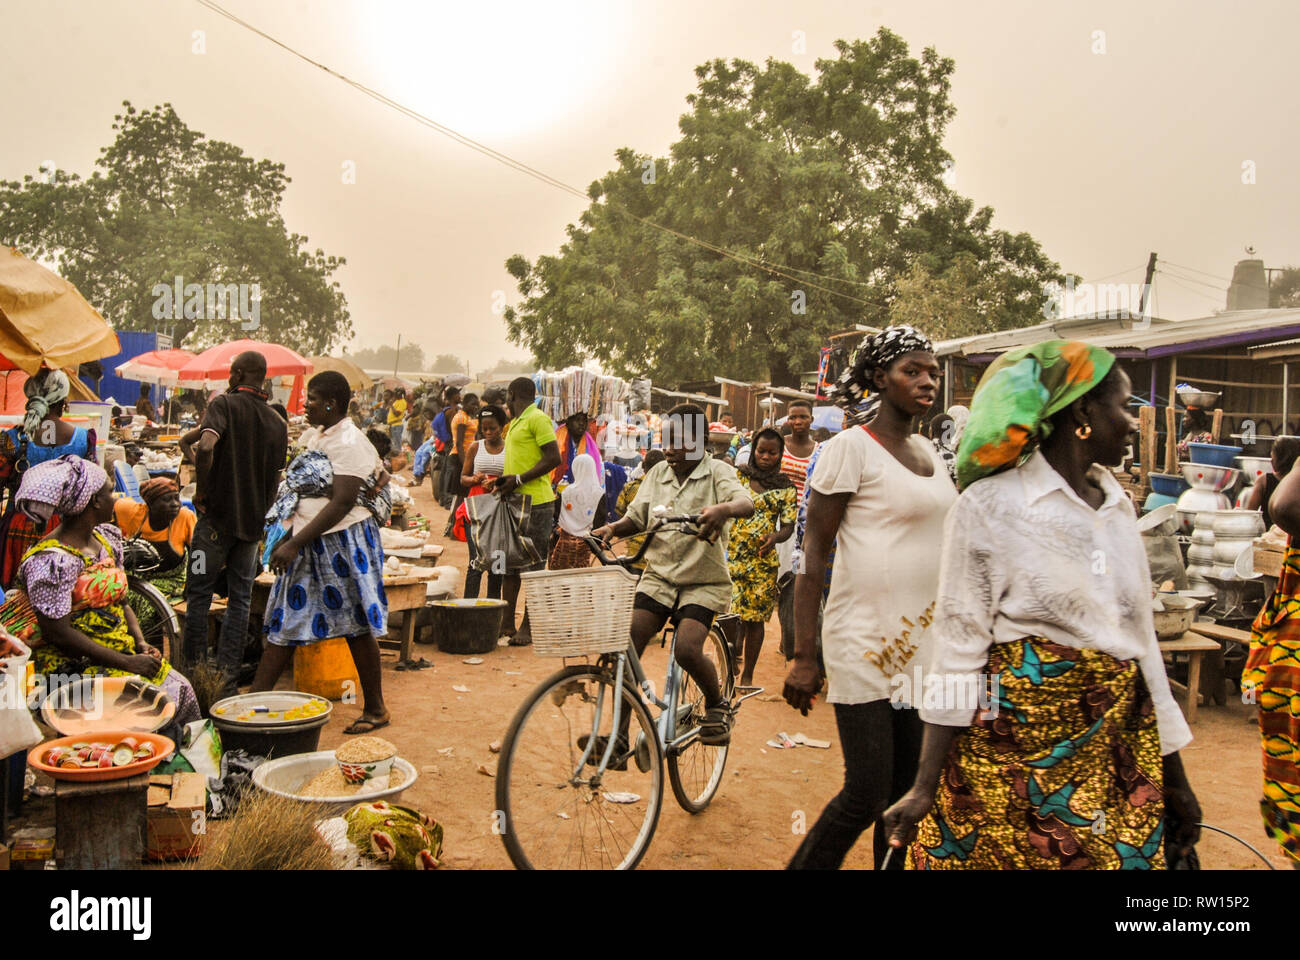 A nice photo of beautiful people visiting the fresh farmer's market in the town of Bolgatanga (Bolga), Ghana. A boy is riding a bicycle. Stock Photo